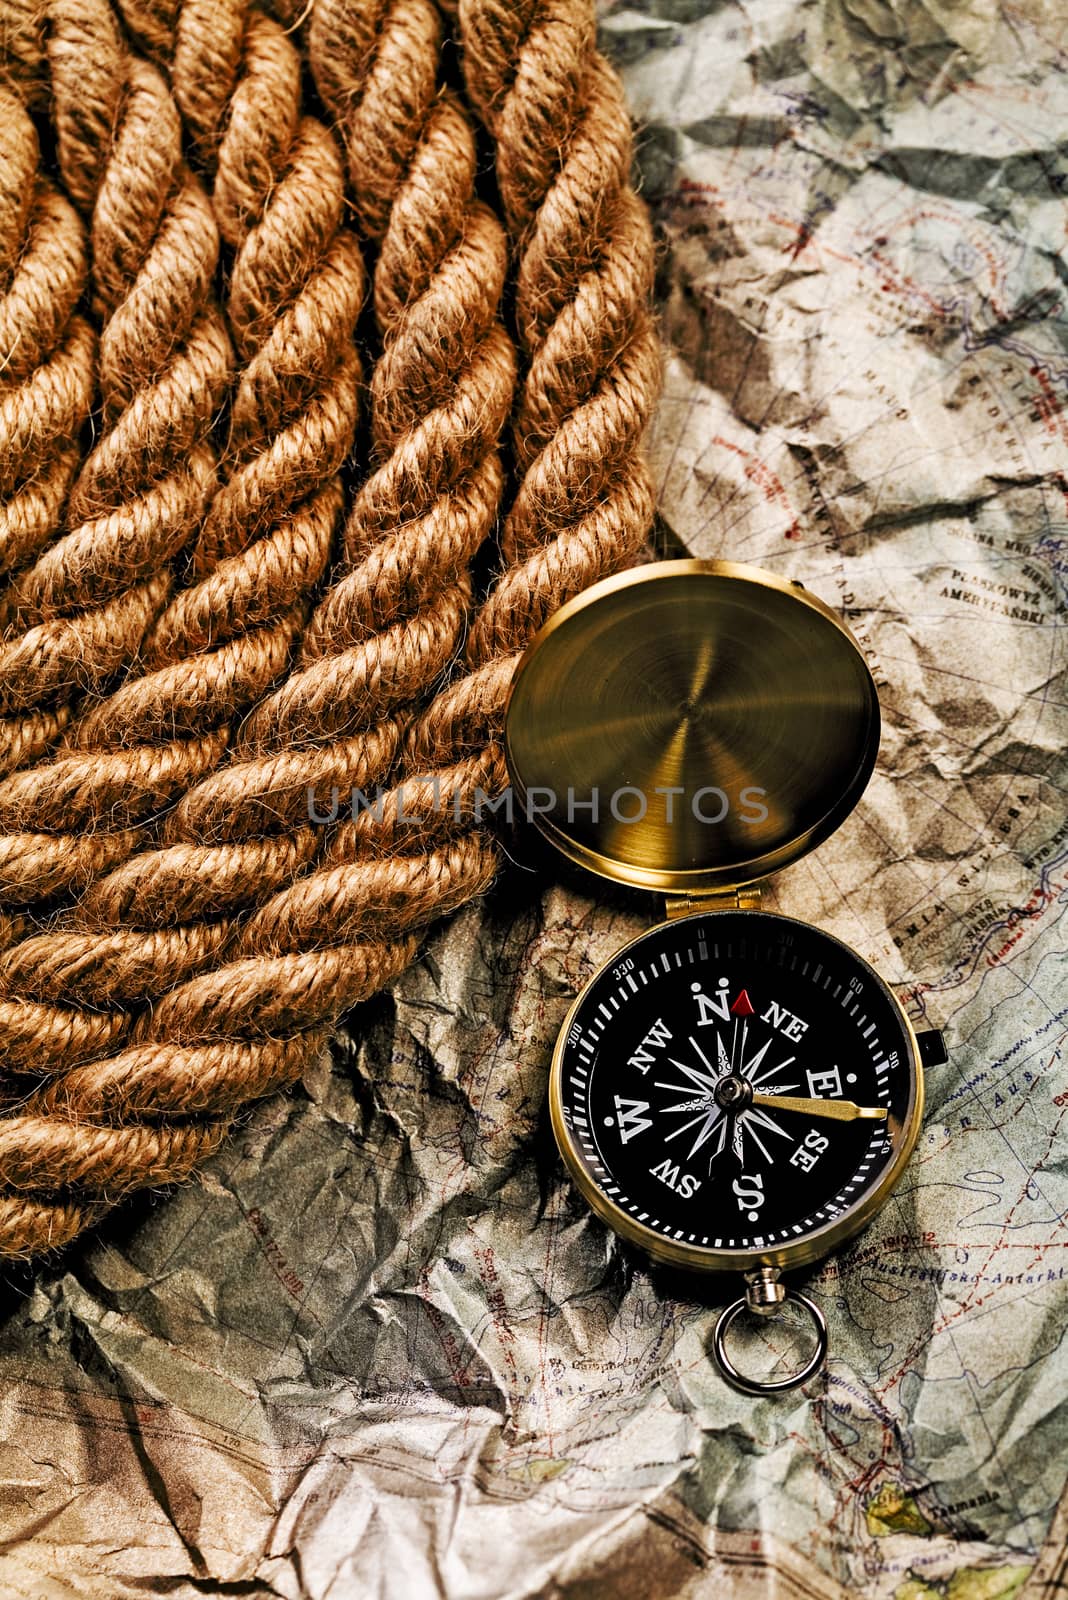 Compass, Old map, ambient light travel theme